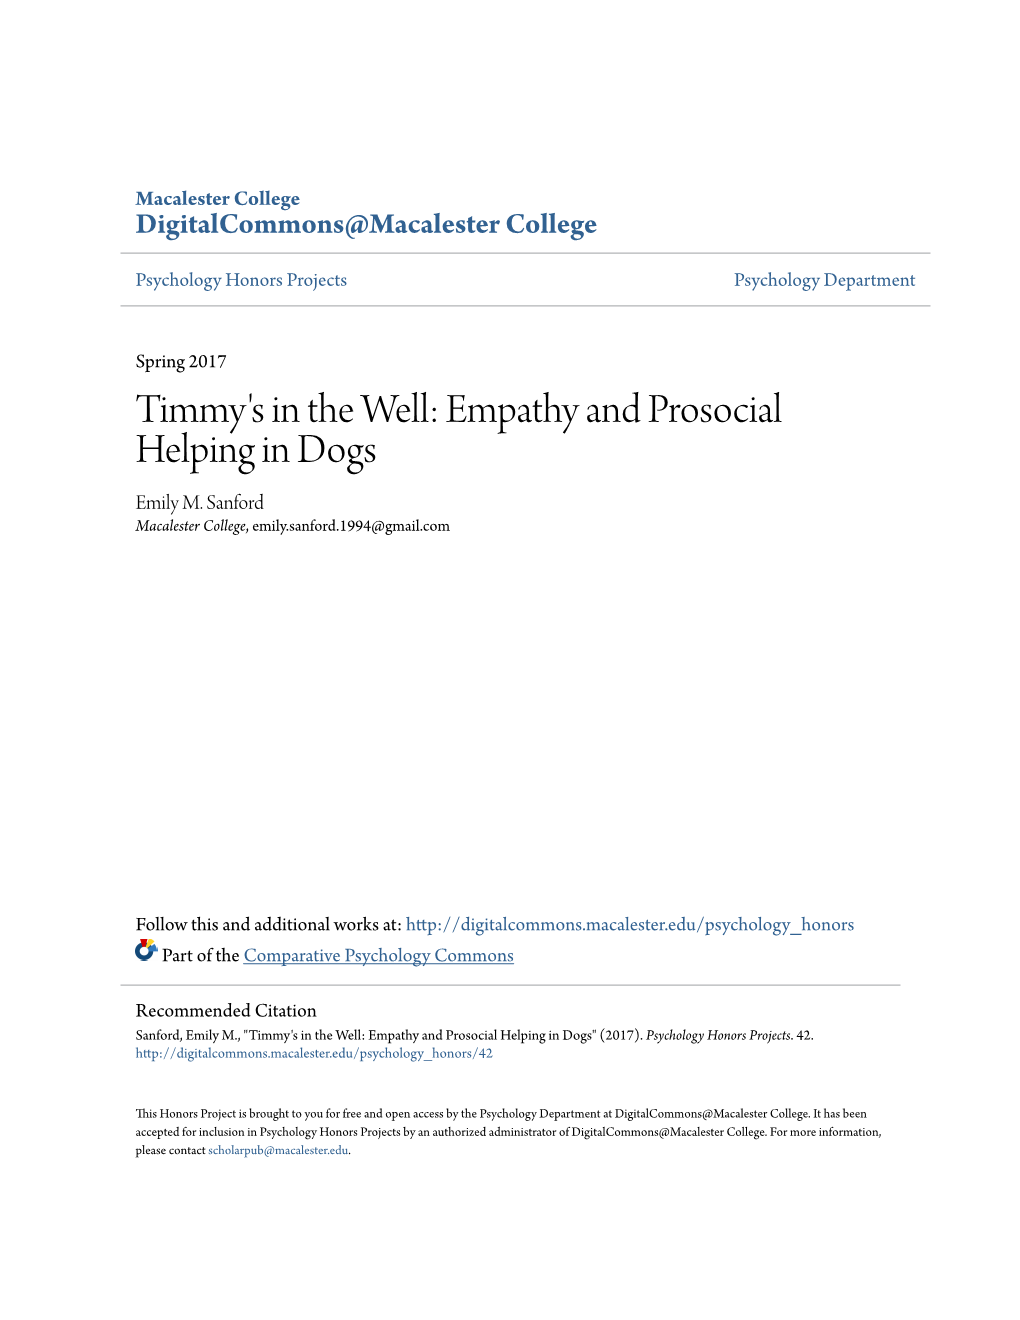 Timmy's in the Well: Empathy and Prosocial Helping in Dogs Emily M